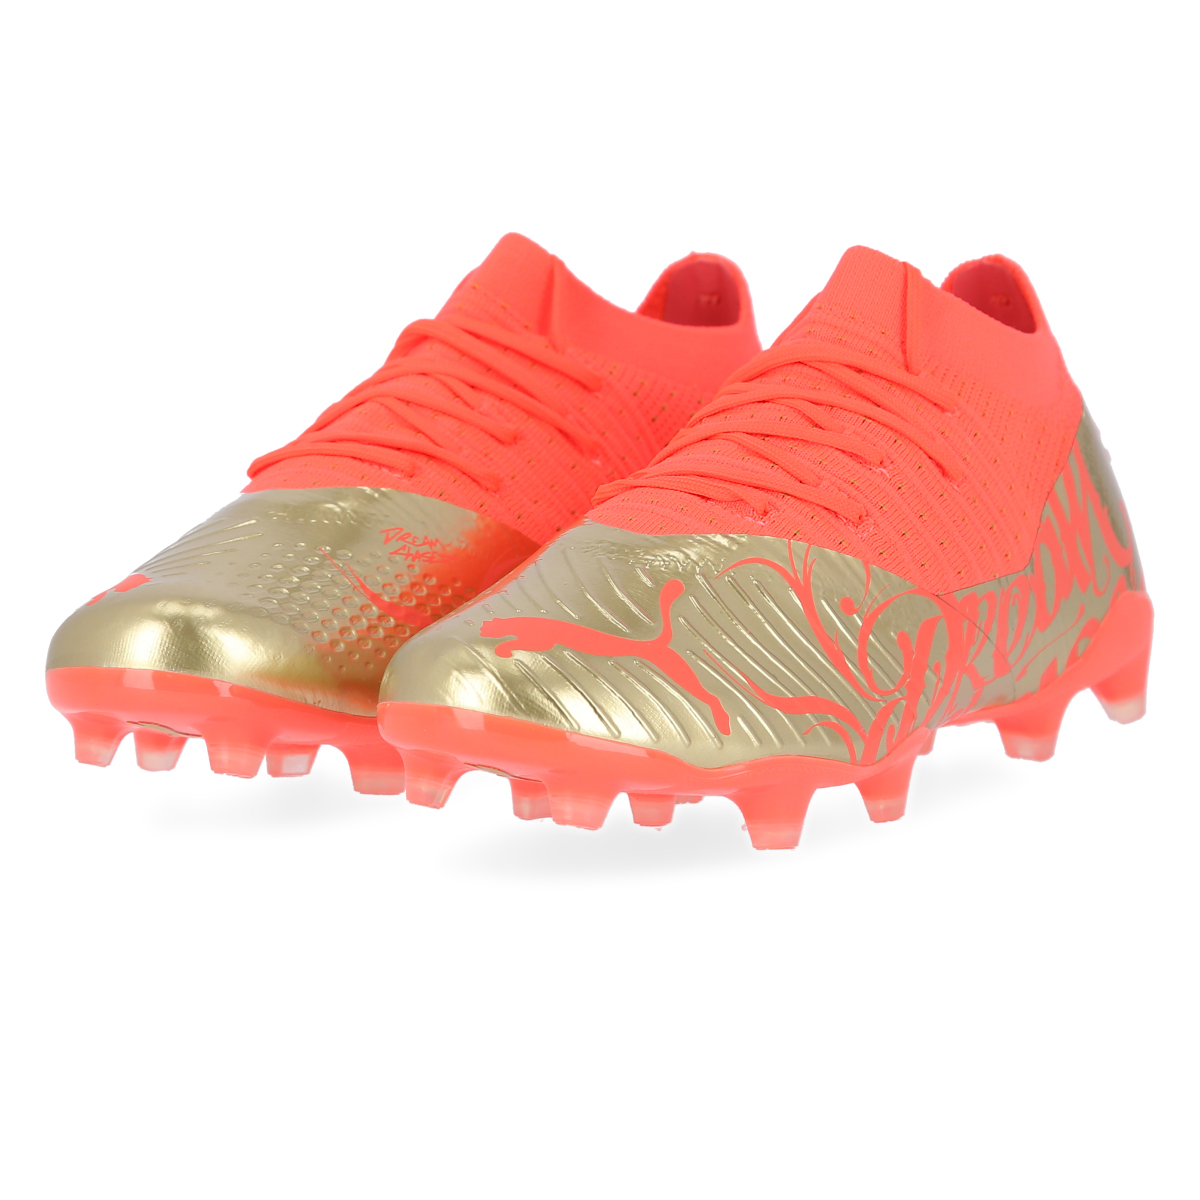 Botines Puma Future Z 3.4 Fg/Ag Cesped,  image number null